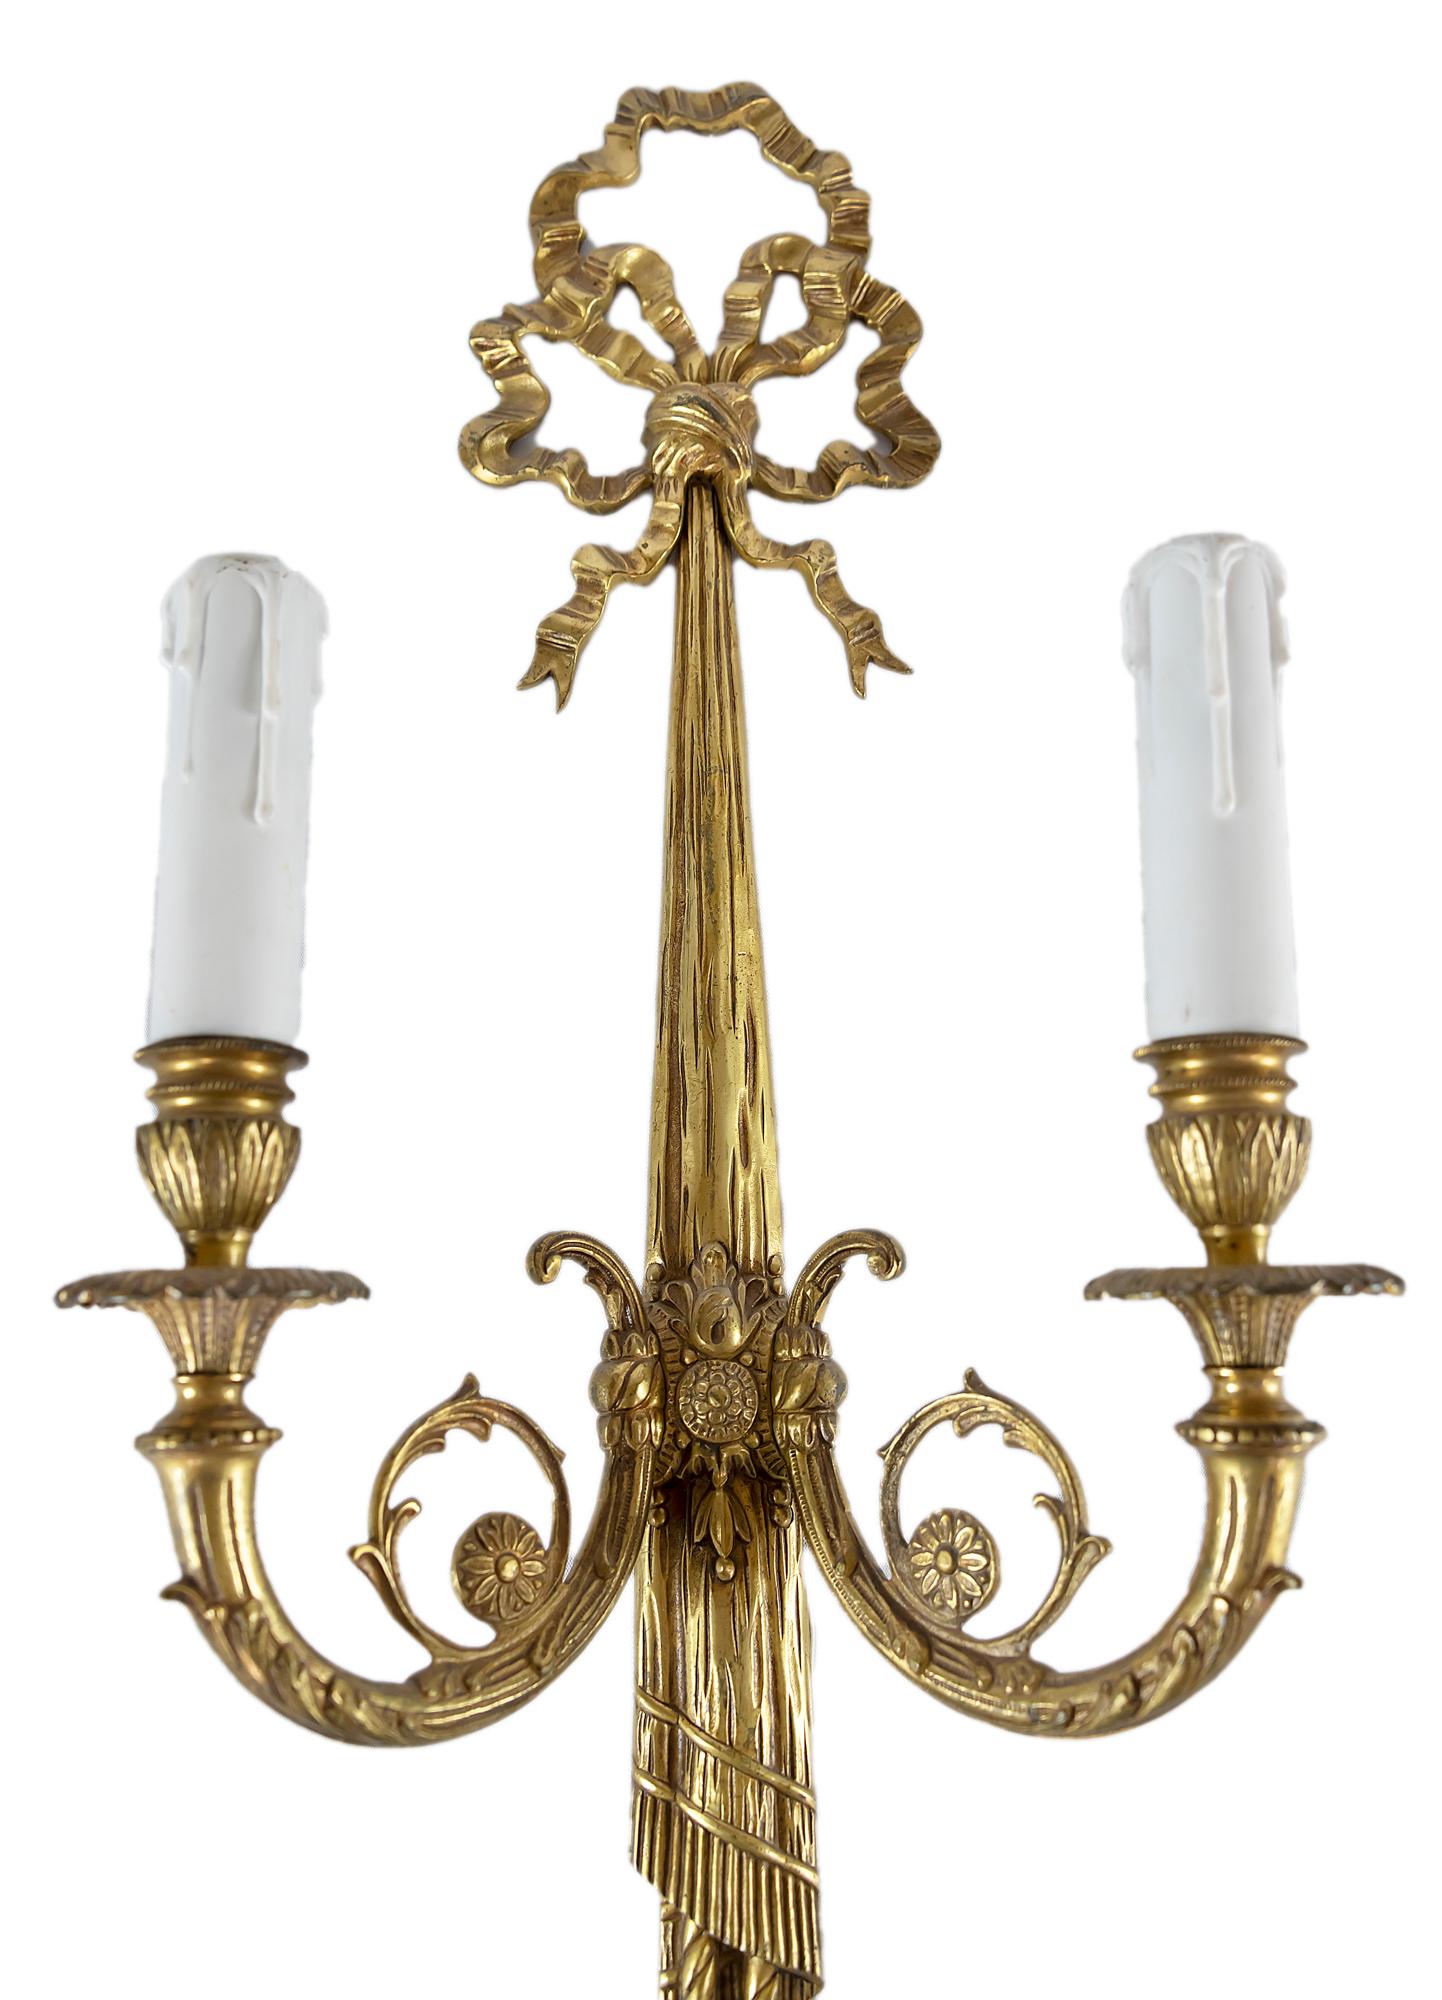 Pair of bronze wall light sconces in the form of ribbon.
Bulbs are E14 (2 pieces in each sconce).